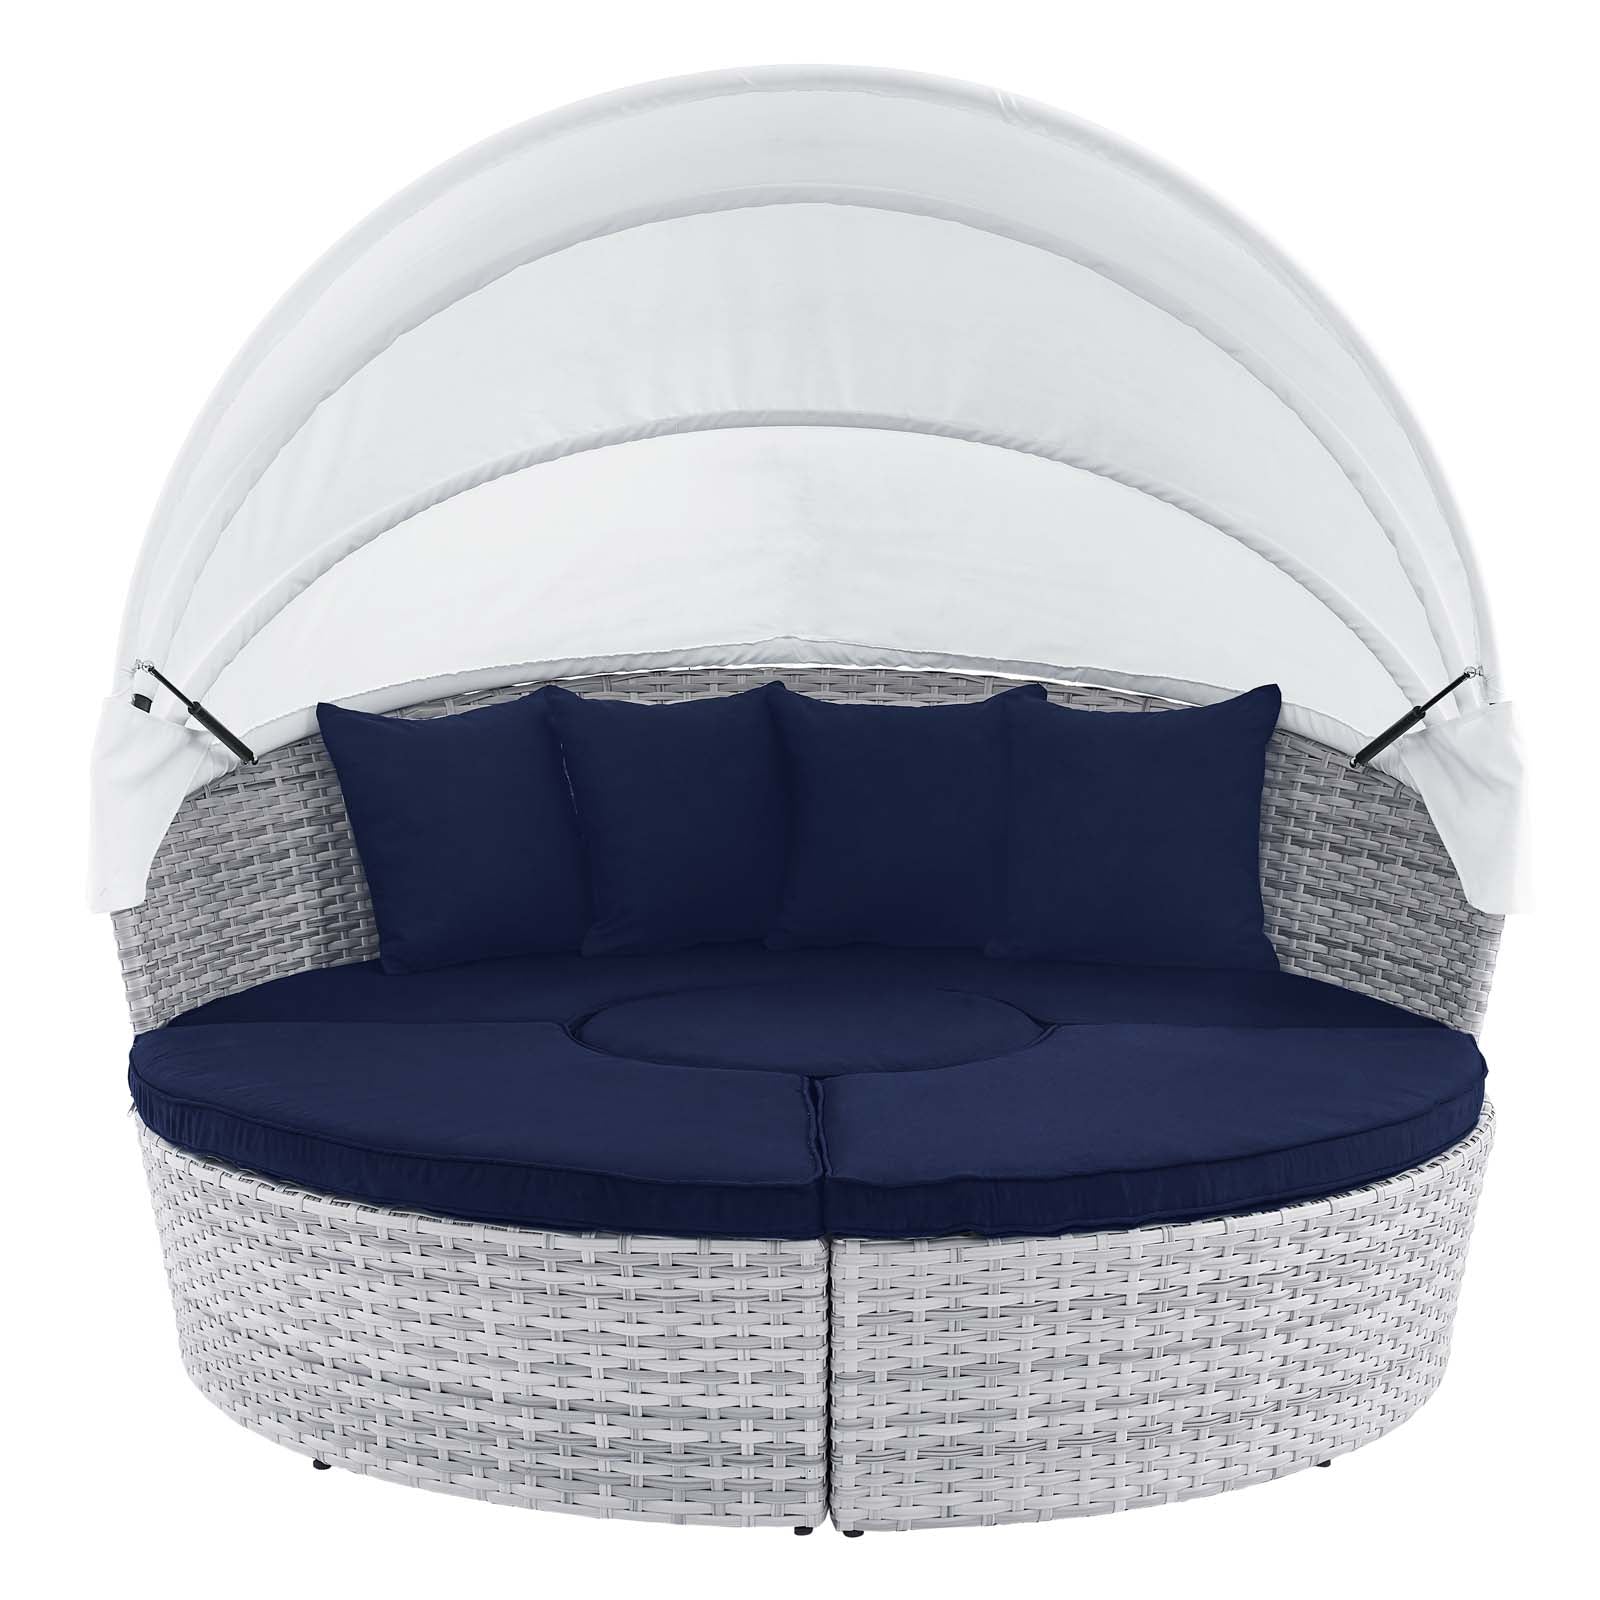 Modway Outdoor Conversation Sets - Scottsdale-Canopy-Sunbrella¨-Outdoor-Patio-Daybed-Light-Gray-Navy